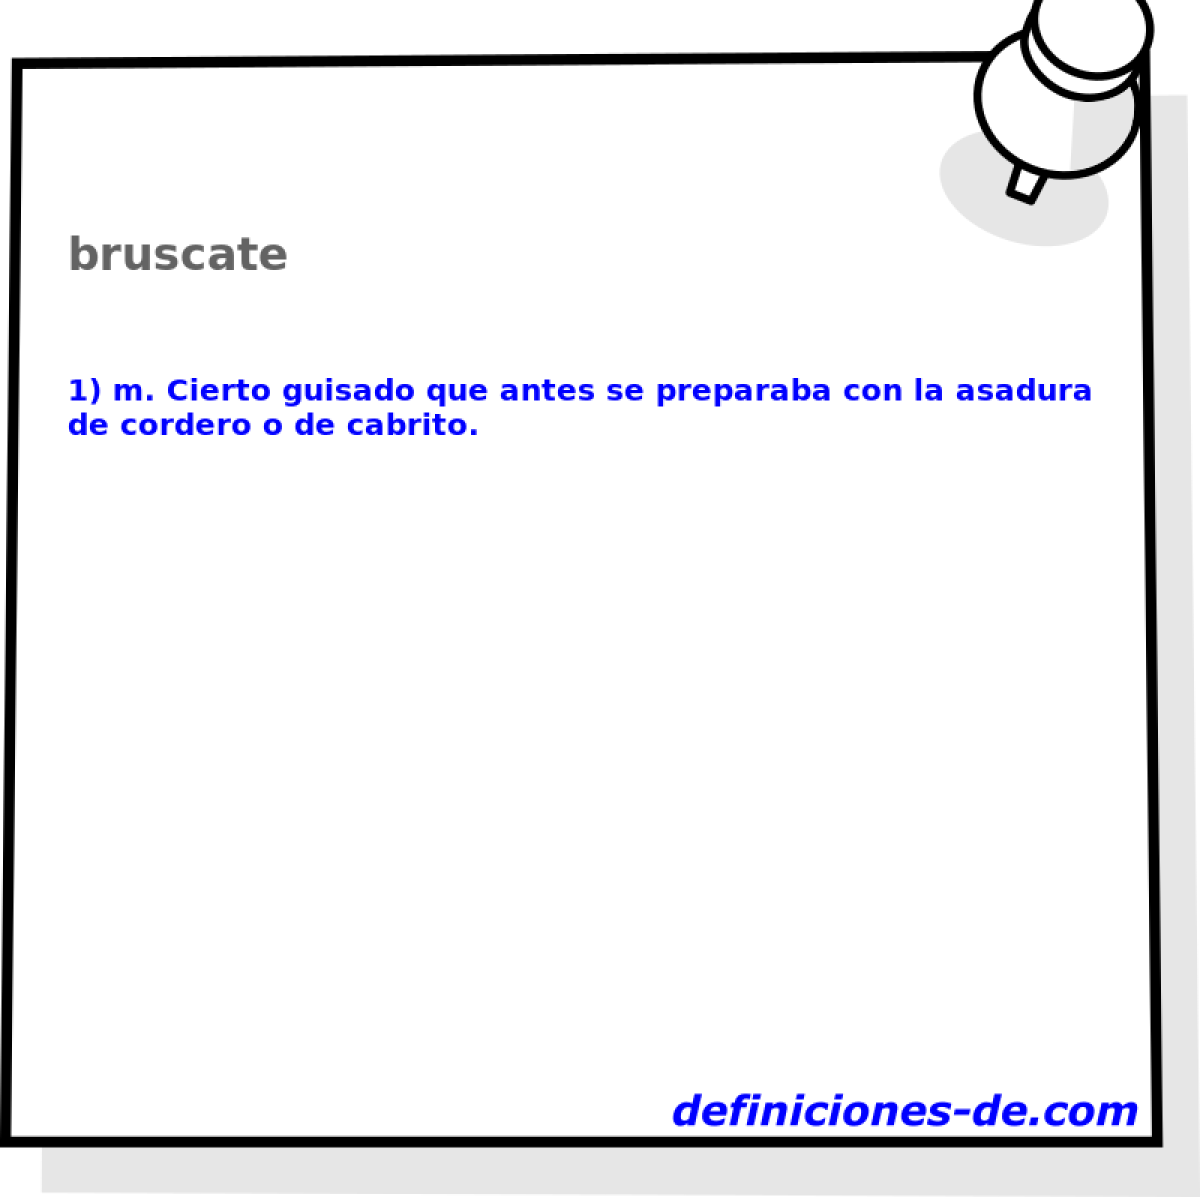 bruscate 